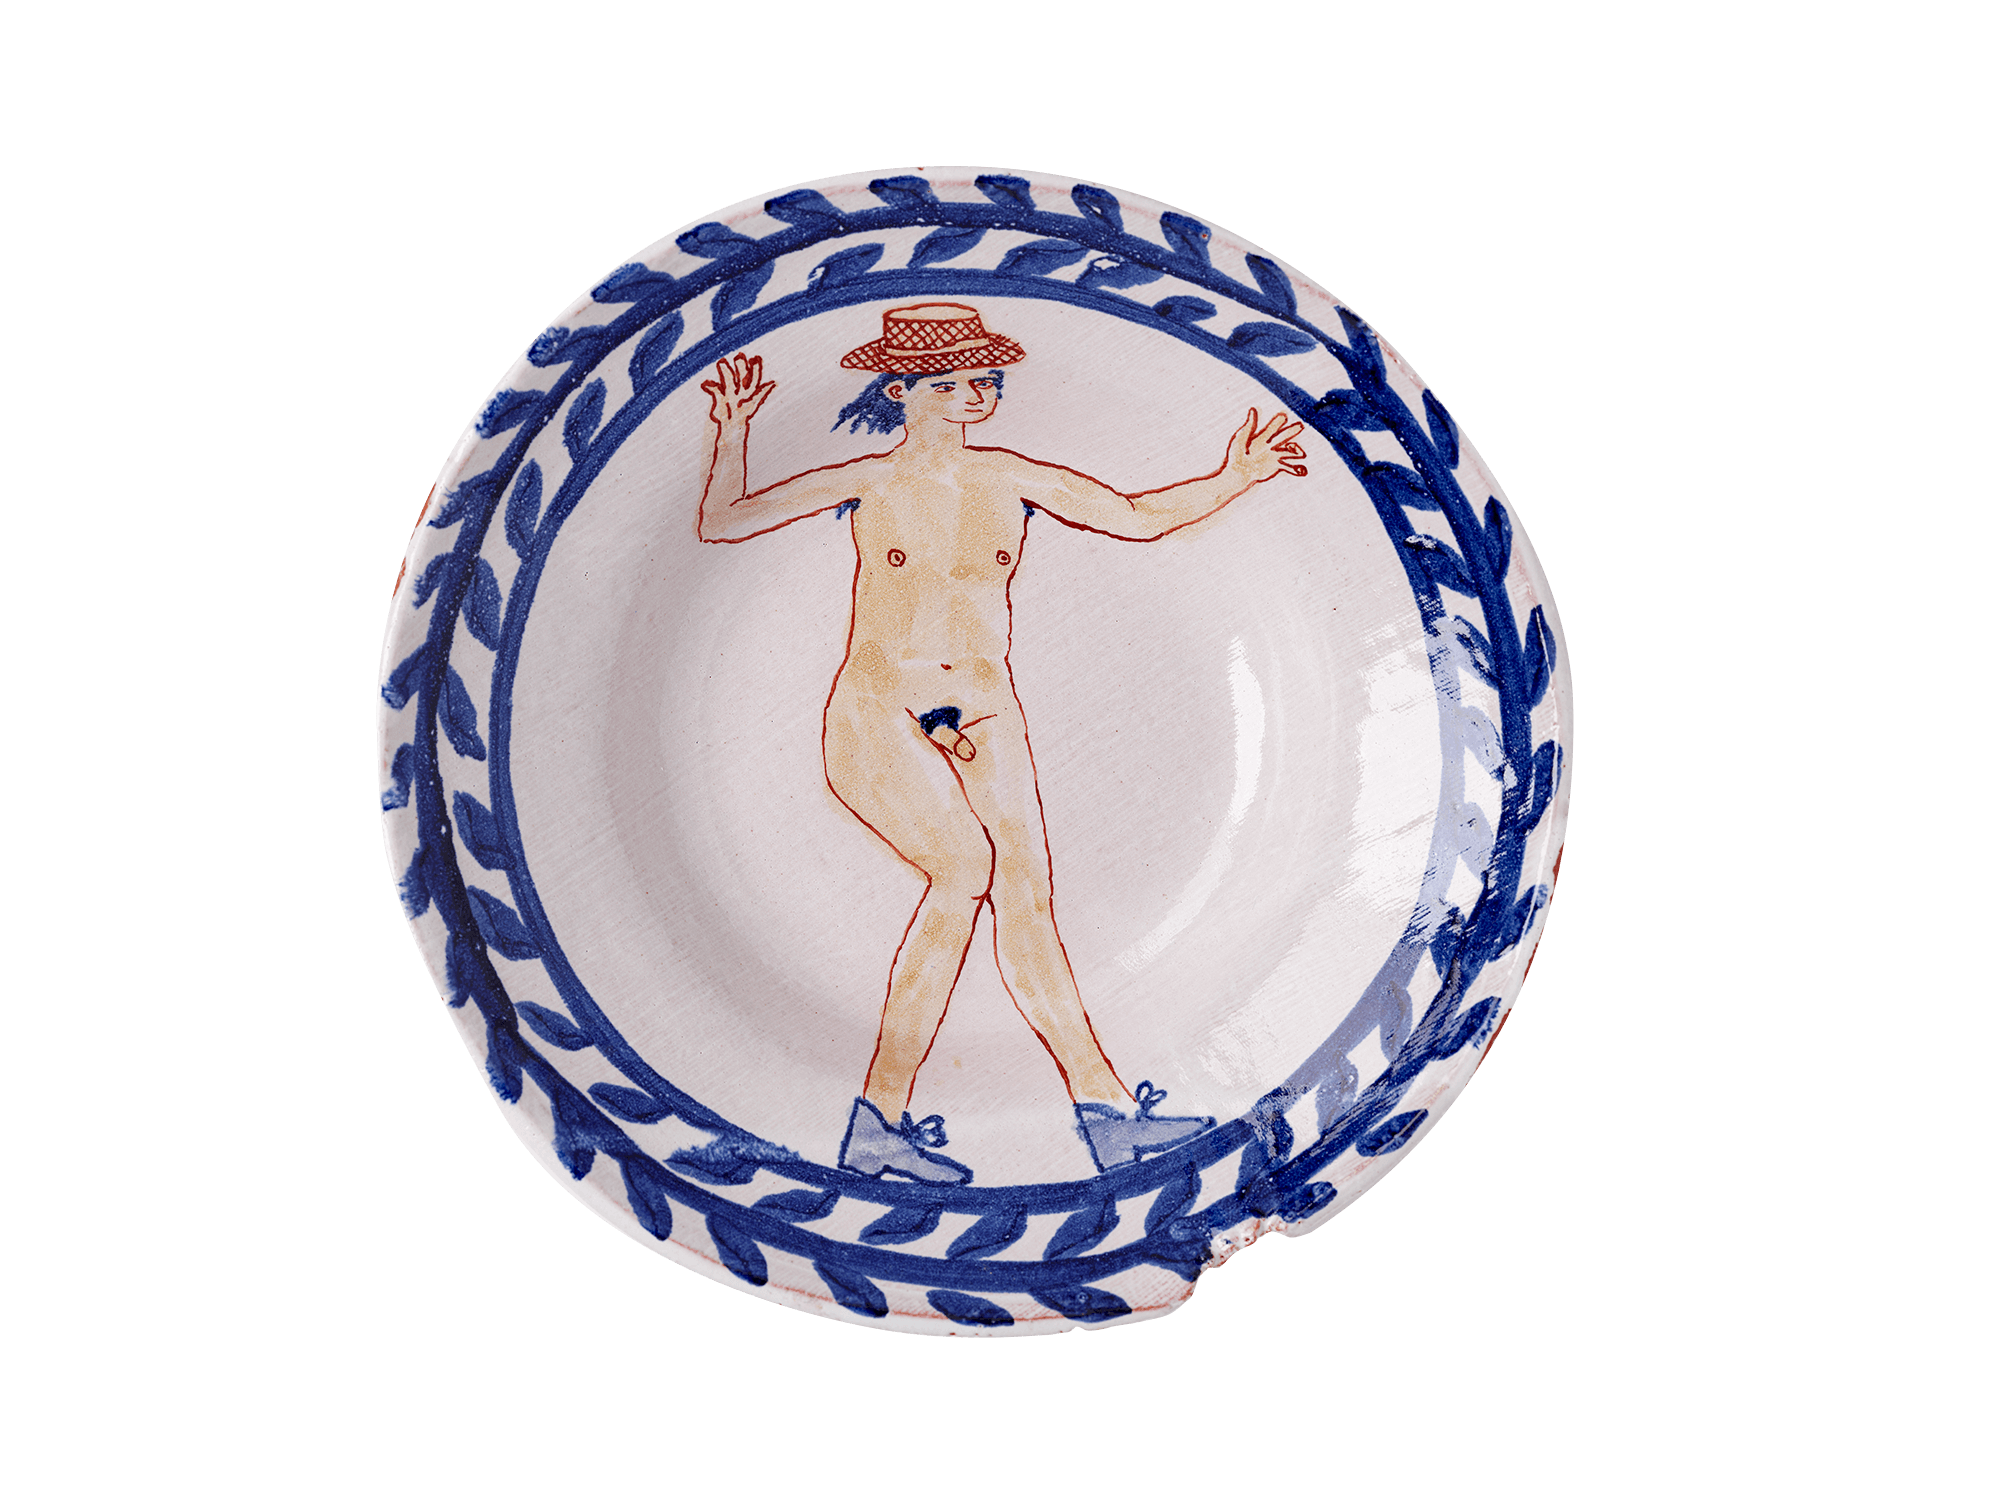 /Ceramic%20plate%20with%20a%20decorative%20floral%20border%20and%20an%20illustration%20of%20a%20dancing%20nude%20man%20wearing%20a%20full-brimmed%20hat%20and%20shoes